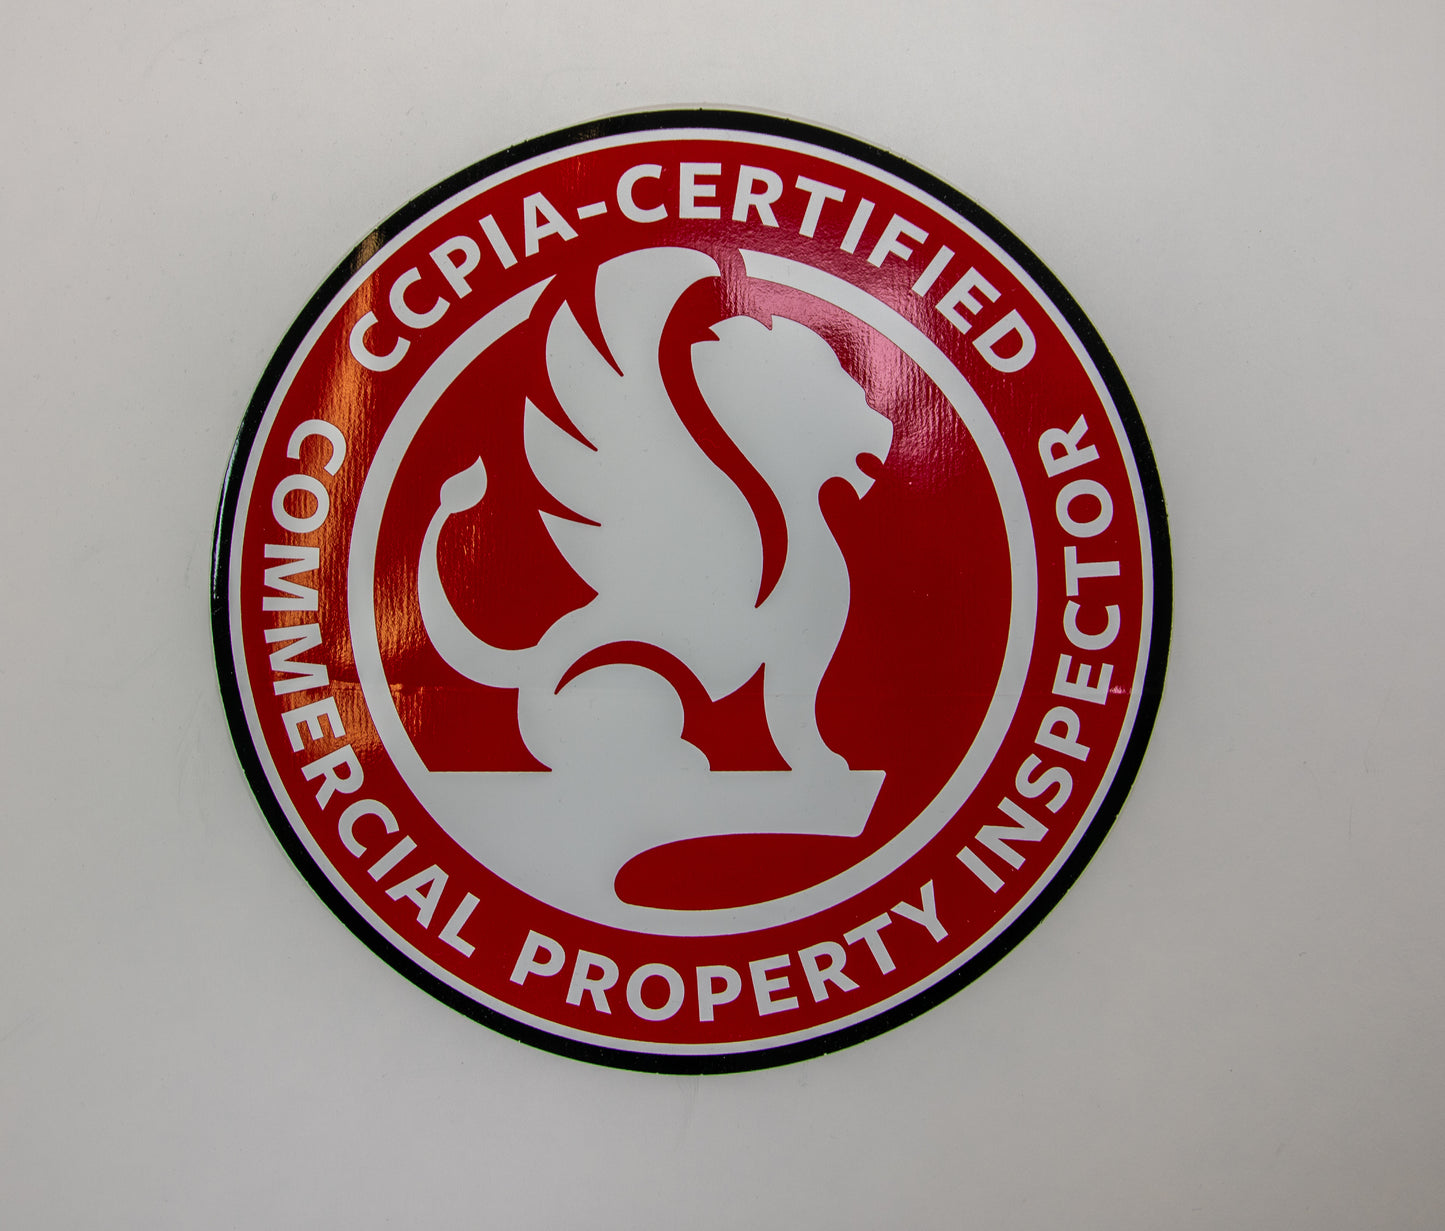 Free CCPIA-Certified Commercial Property Inspector Decal